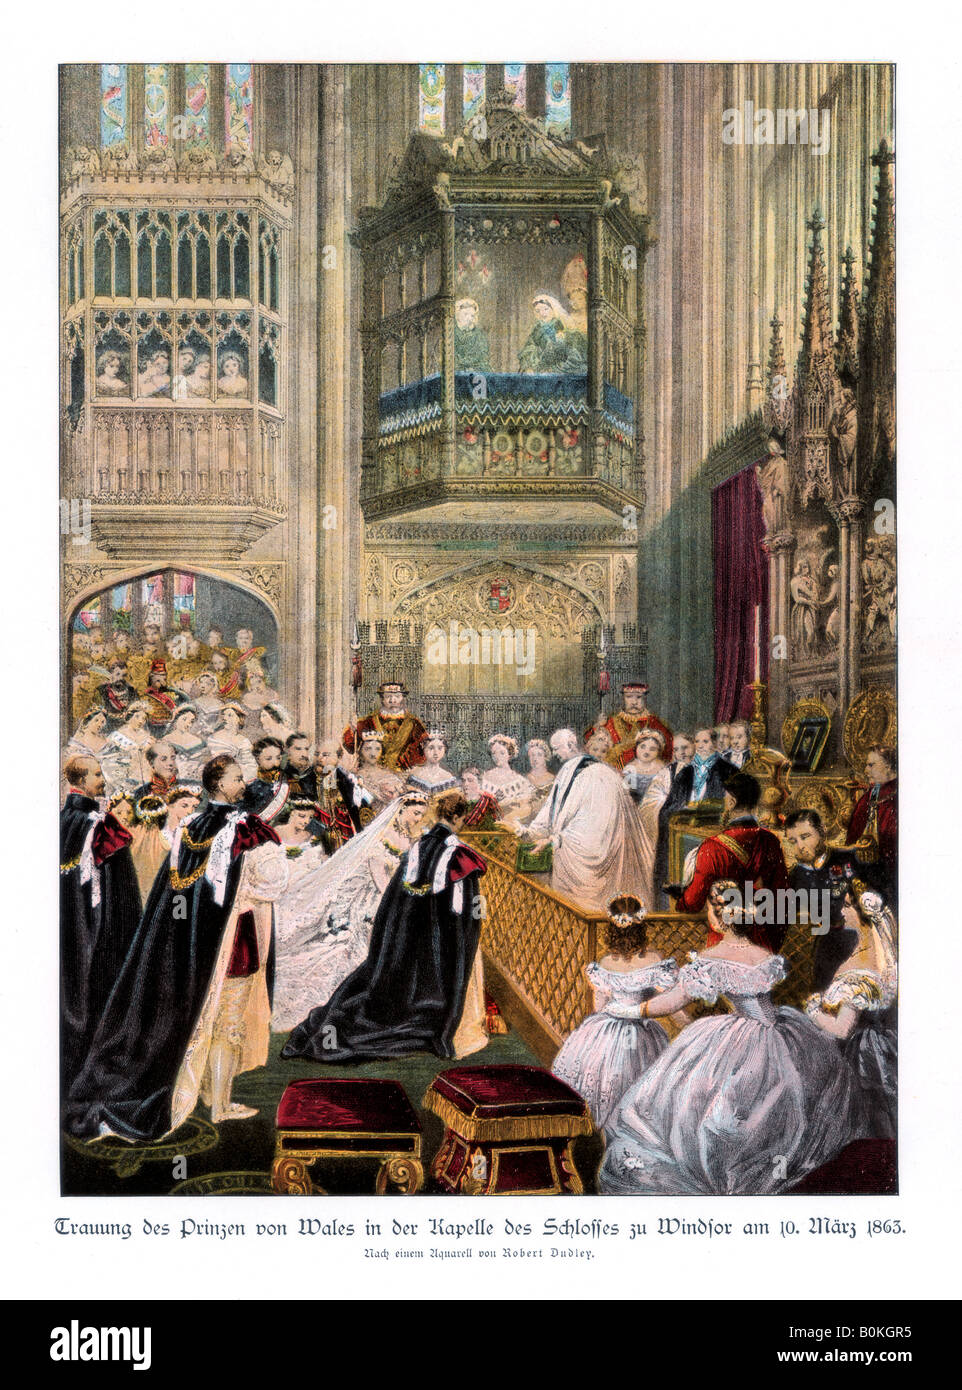 Princess Alexandra's and Prince Edward's wedding, St Georges Chapel at Windsor, (10th March 1863), 1Artist: Robert Dudley Stock Photo